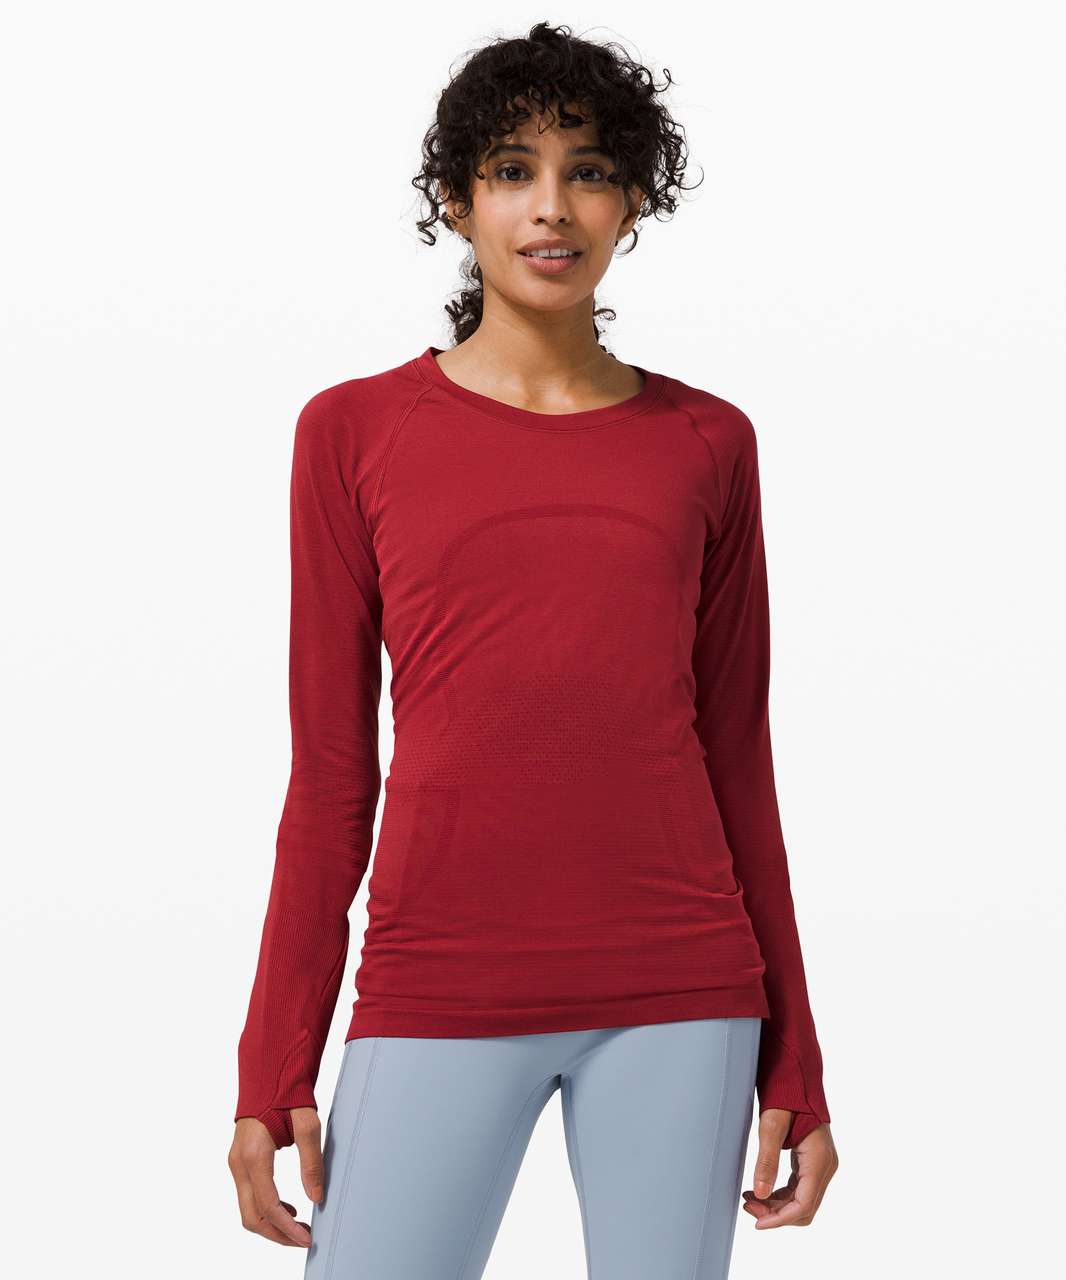 Lululemon Swiftly Tech Long Sleeve 2.0 - Prep Red / Prep Red (First Release)